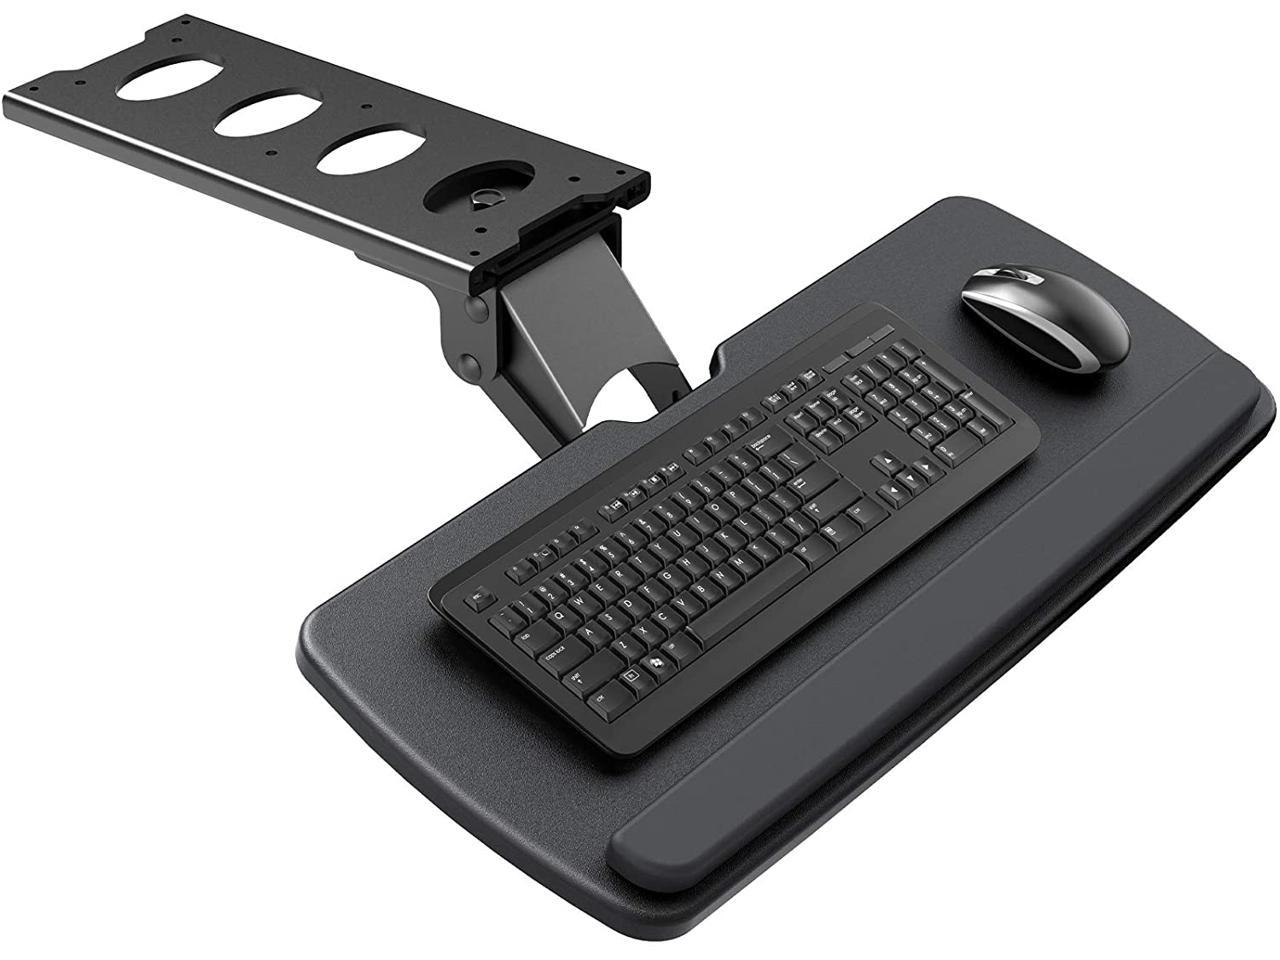 EQEY Keyboard Tray Under Desk 25 x9.8 inch 360°Adjustable Keyboard Mount and Mouse Tray Smoothly Pull Out Desk Extender with Soft Supportive Pad 